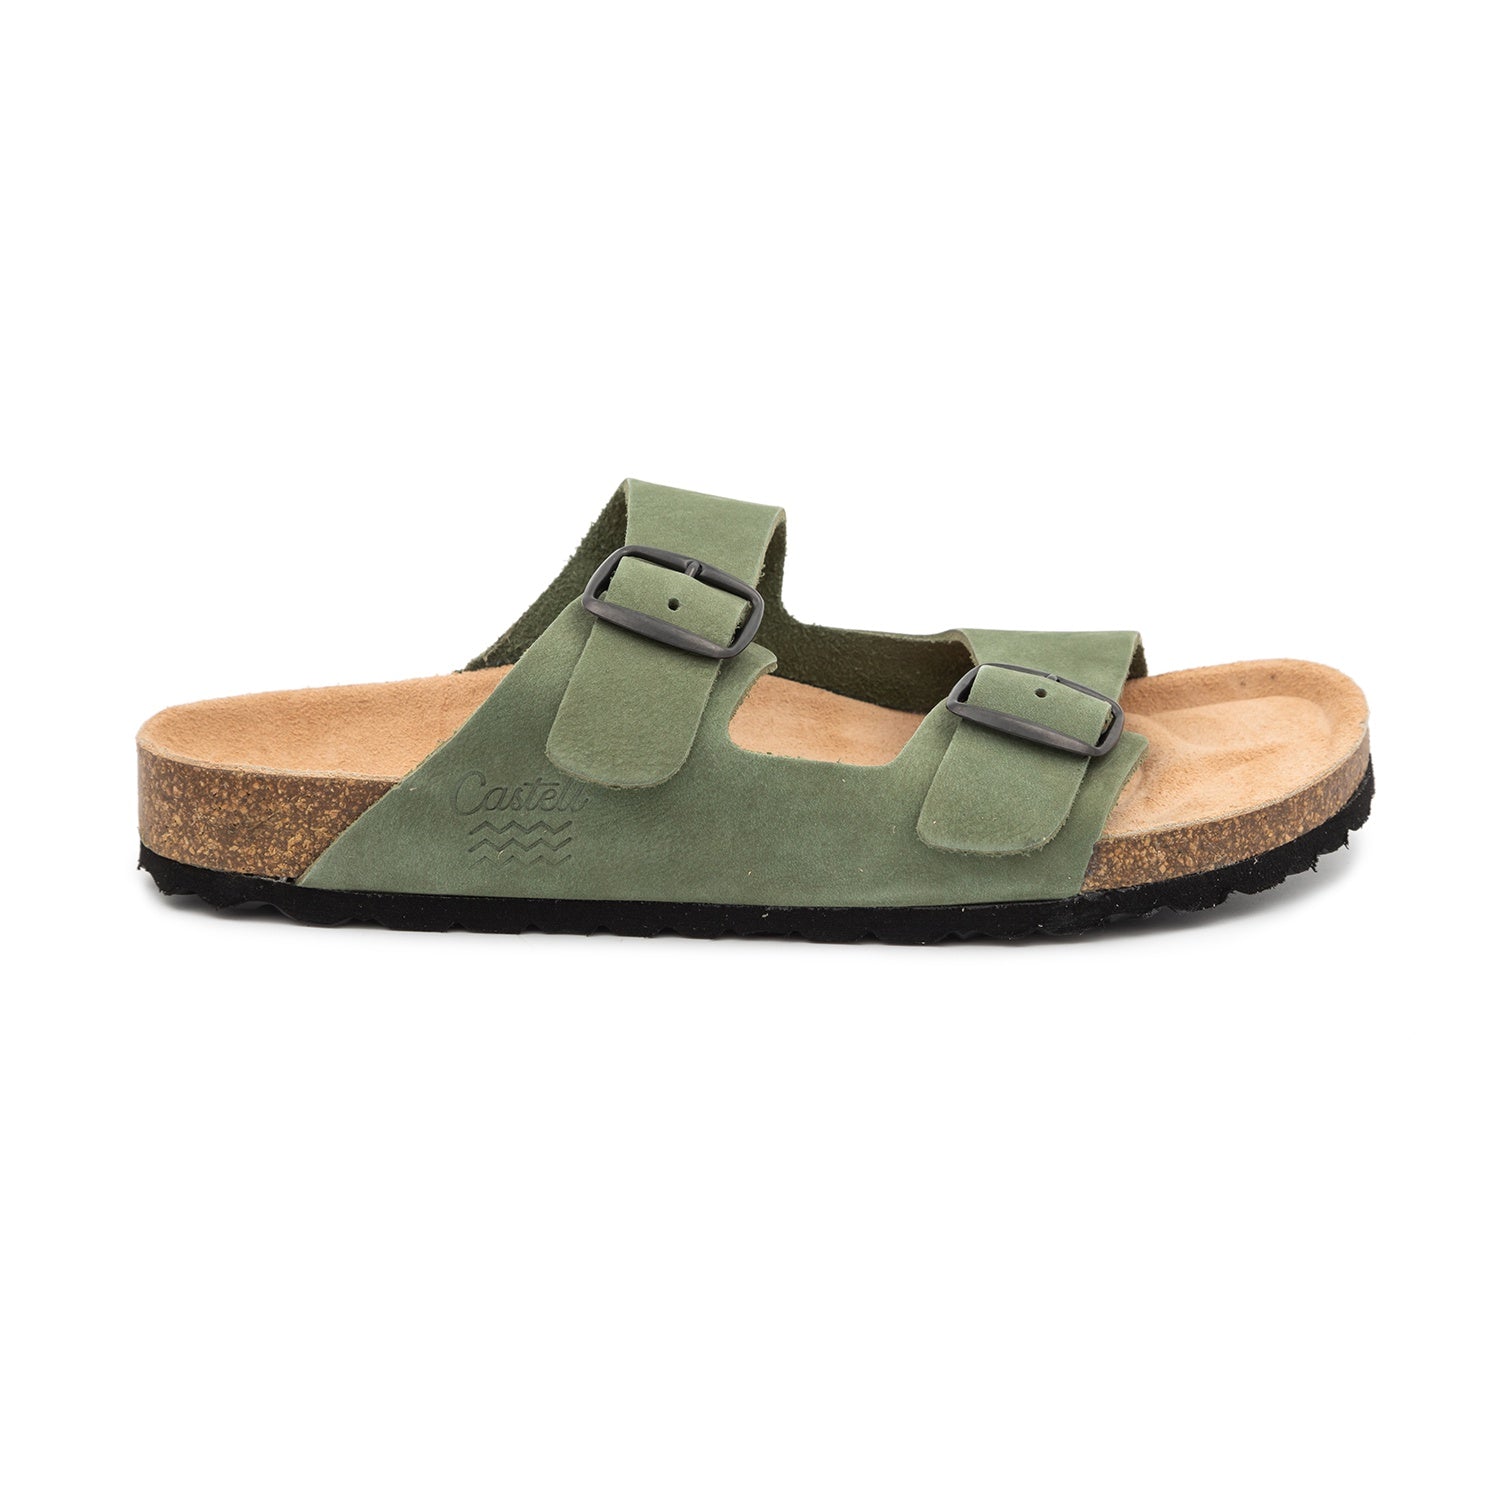 Leather Sandal With Open Toe for Men - 1727 Greco Nobuck